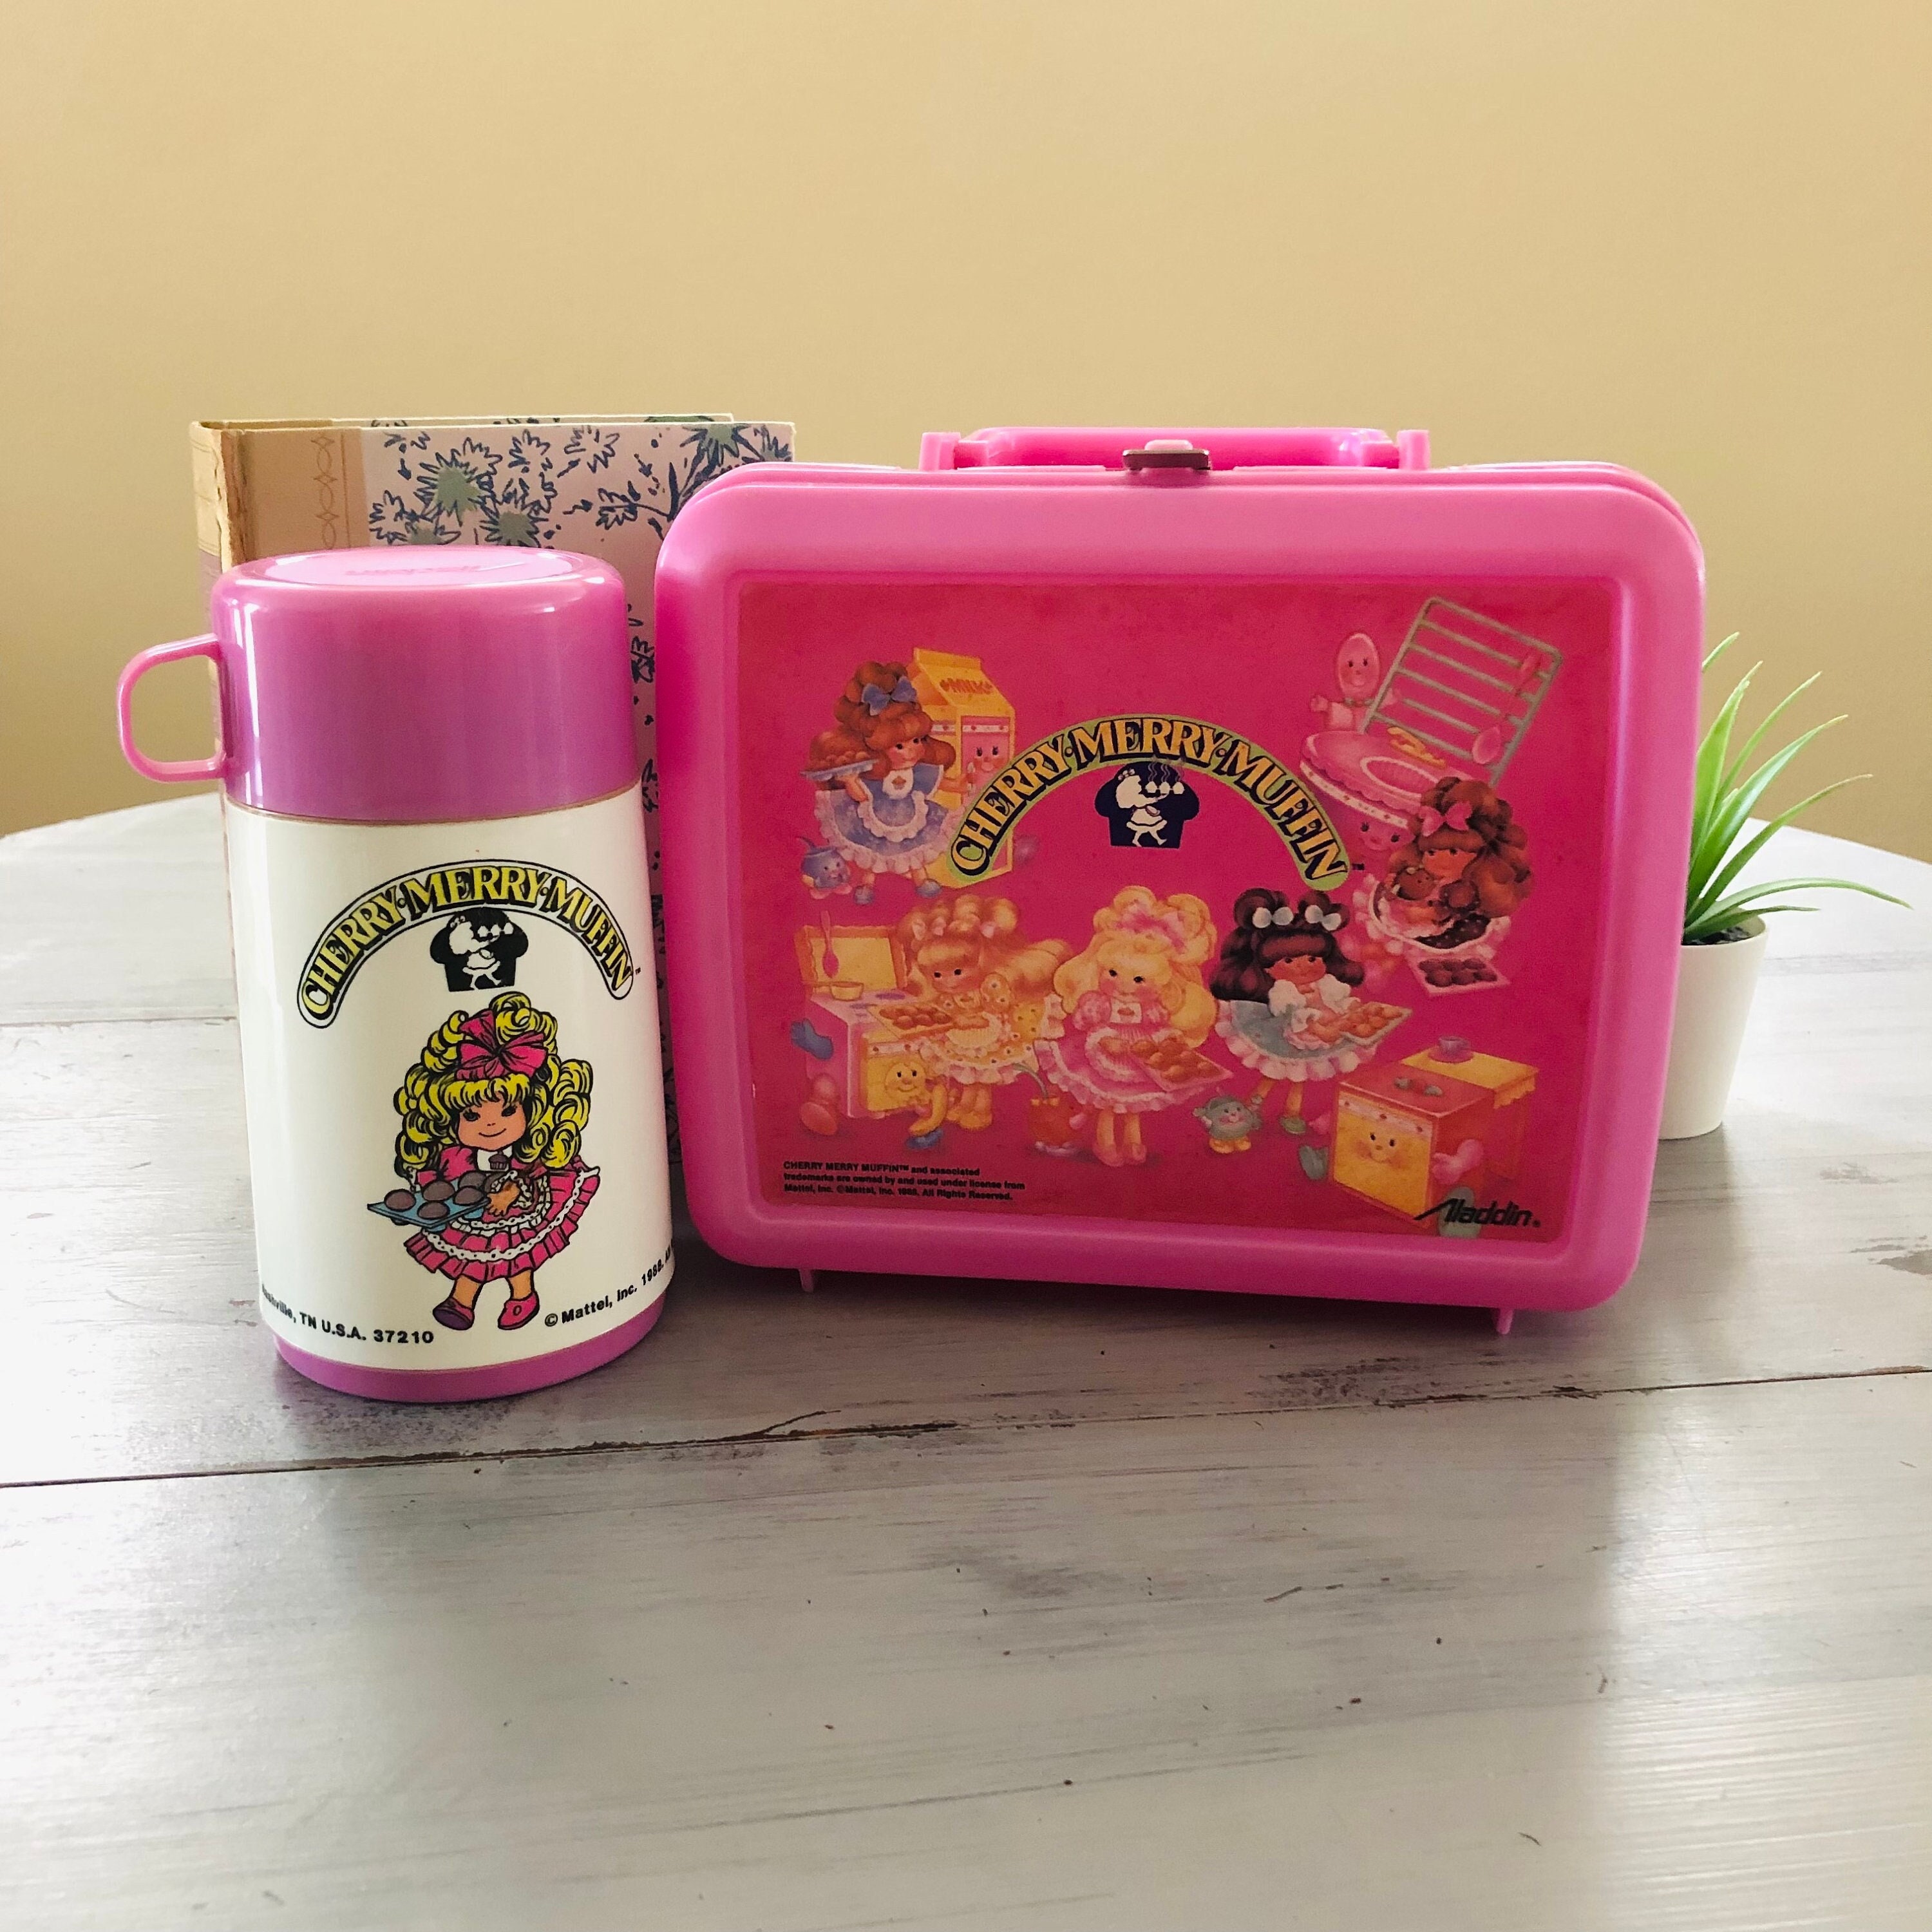 Vintage Cherry Merry Muffin Lunch Box vintage 80's Plastic Lunch